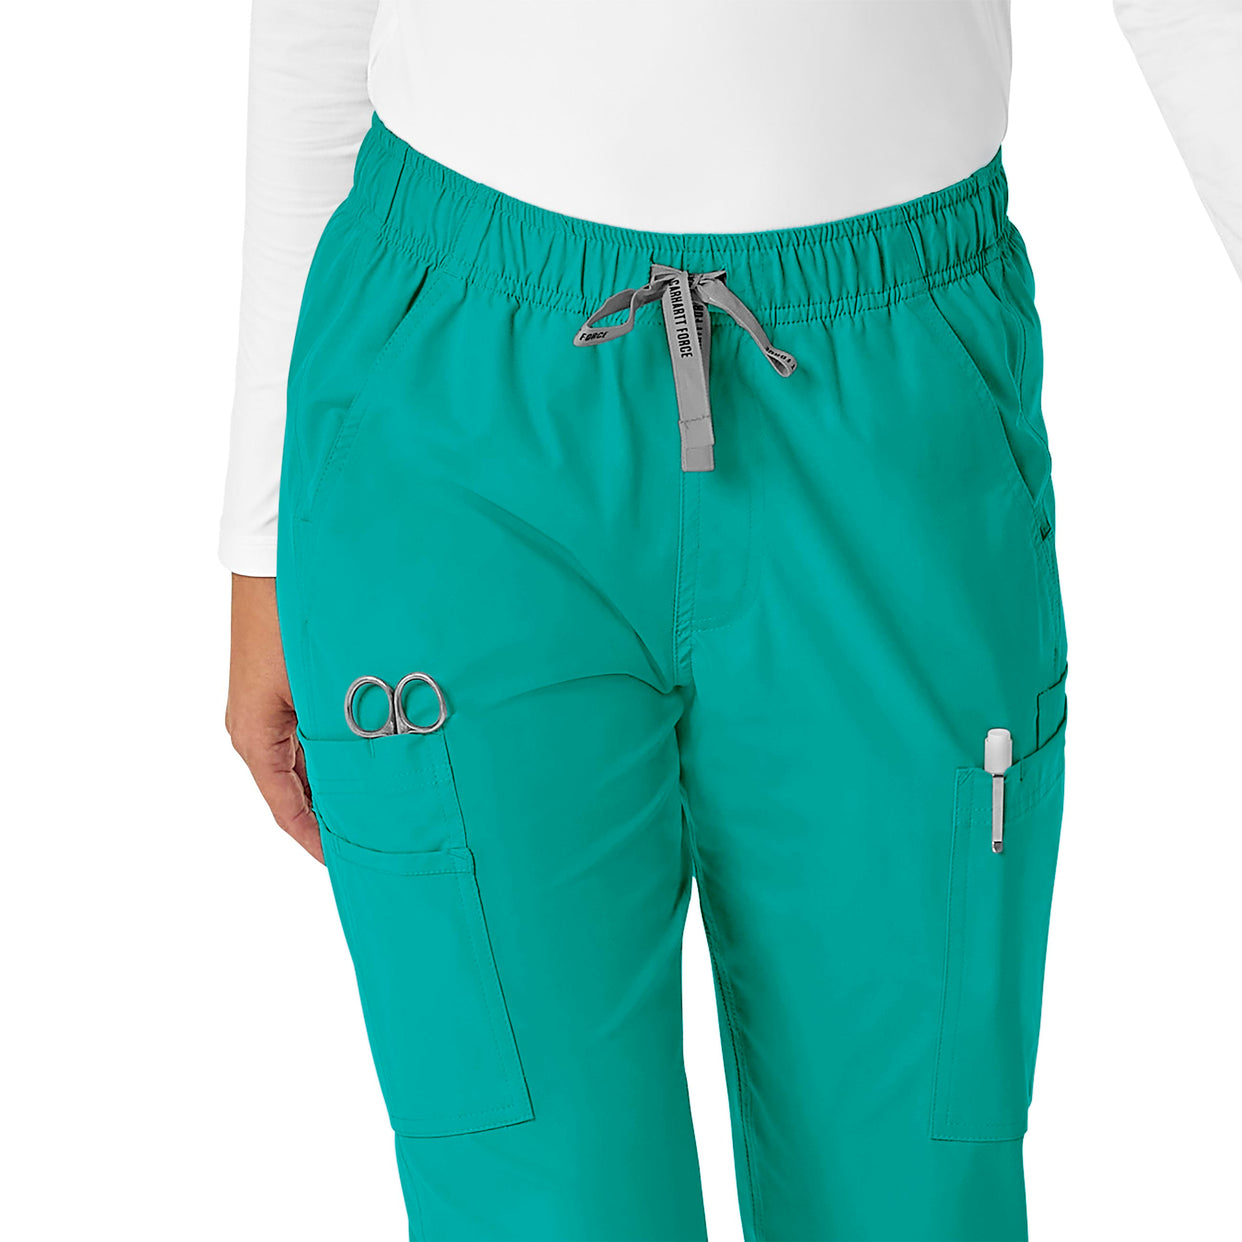 Force Essentials Women's Straight Leg Scrub Pant Teal Blue front detail